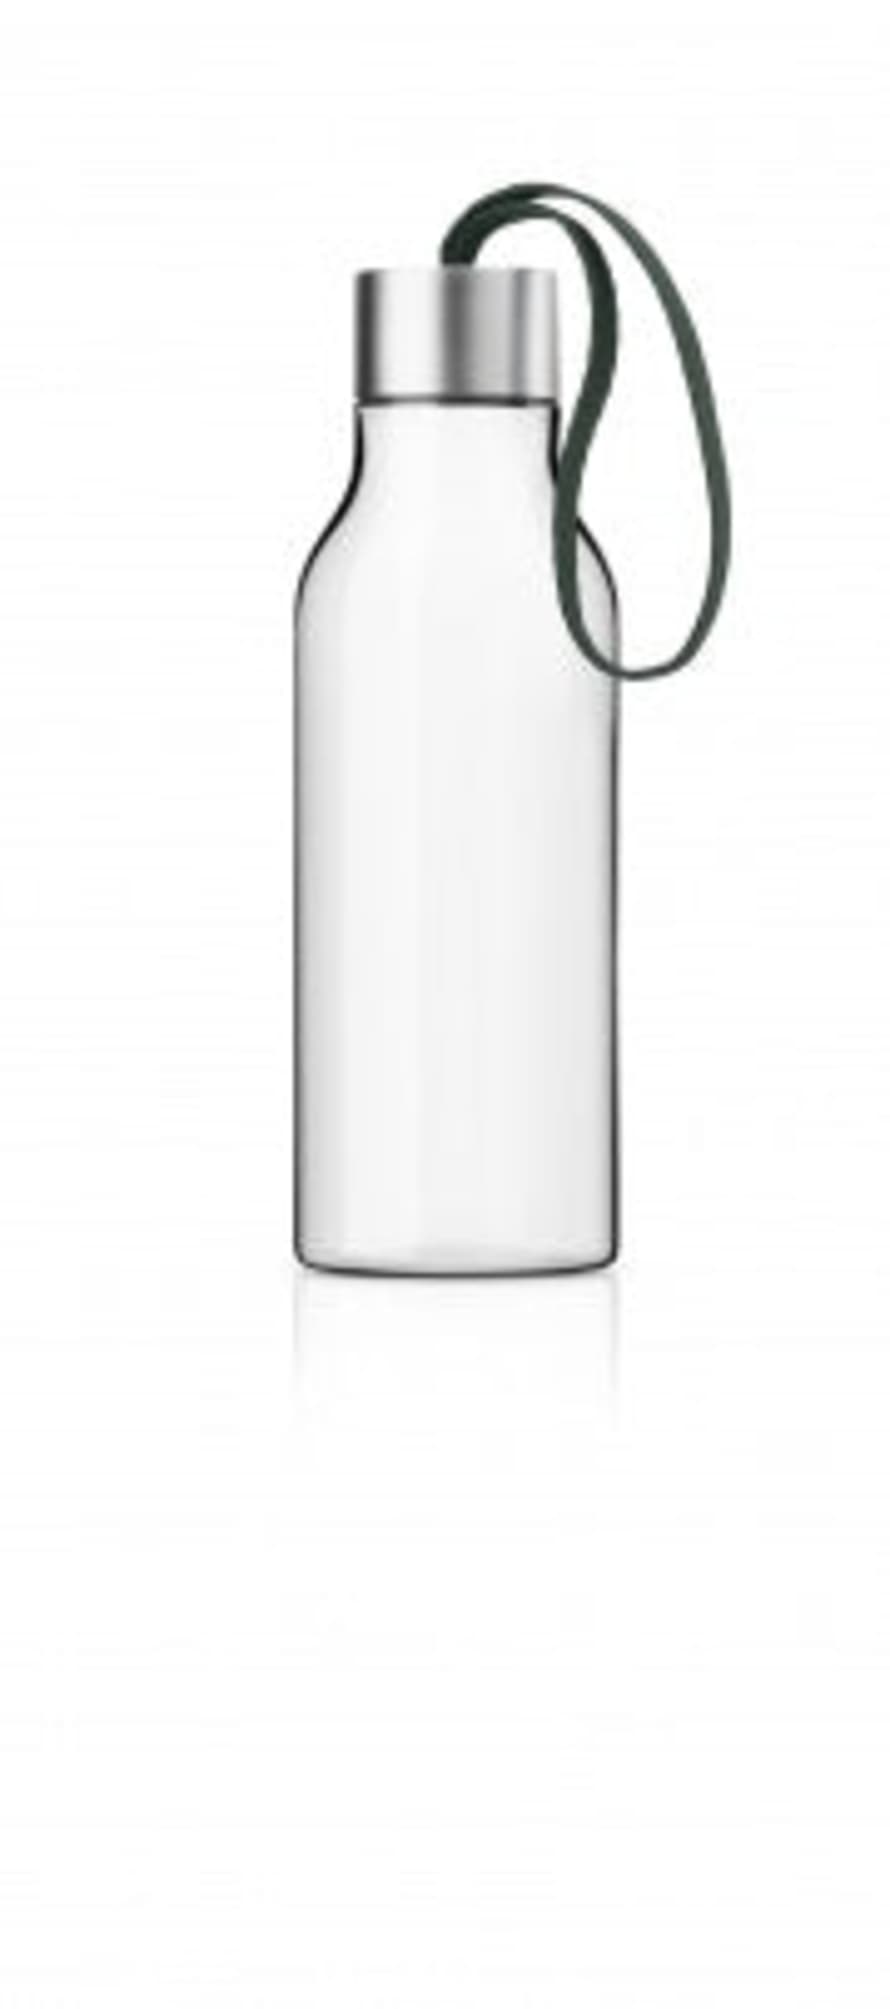 Formahouse - Eva Solo Eva Solo Drinking Bottle 0.7l Forest Green